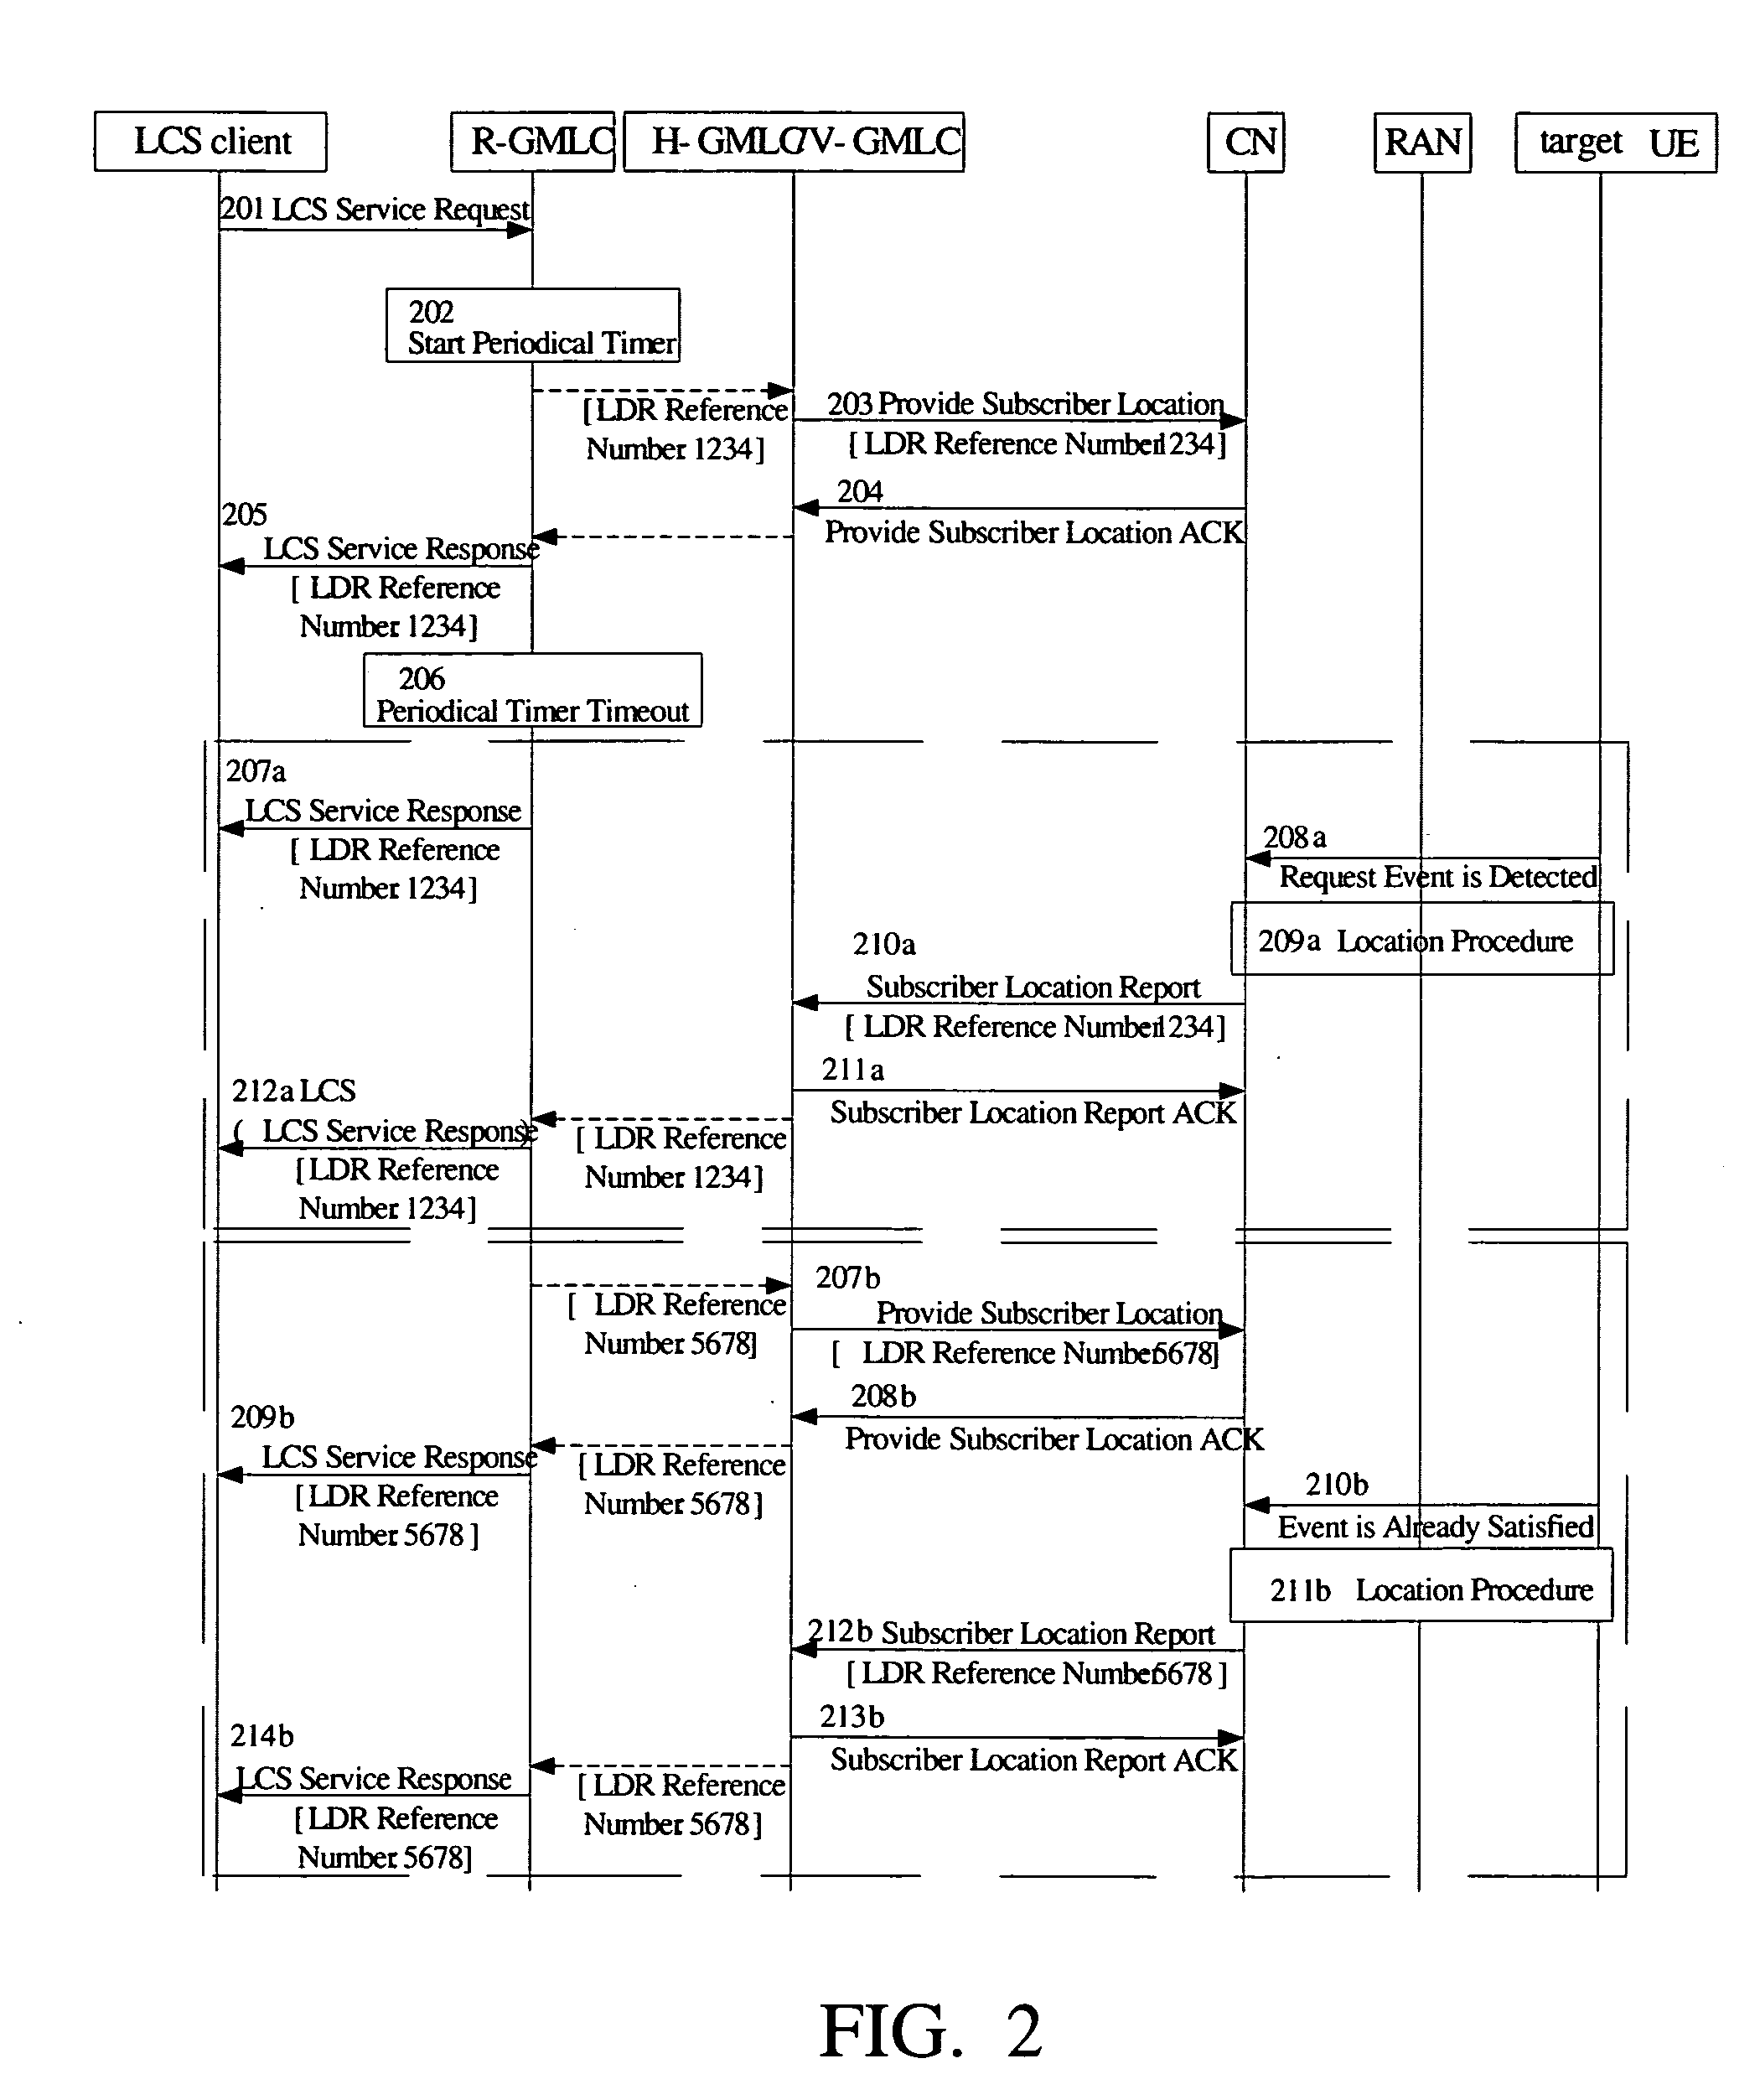 Method of processing a periodic location request